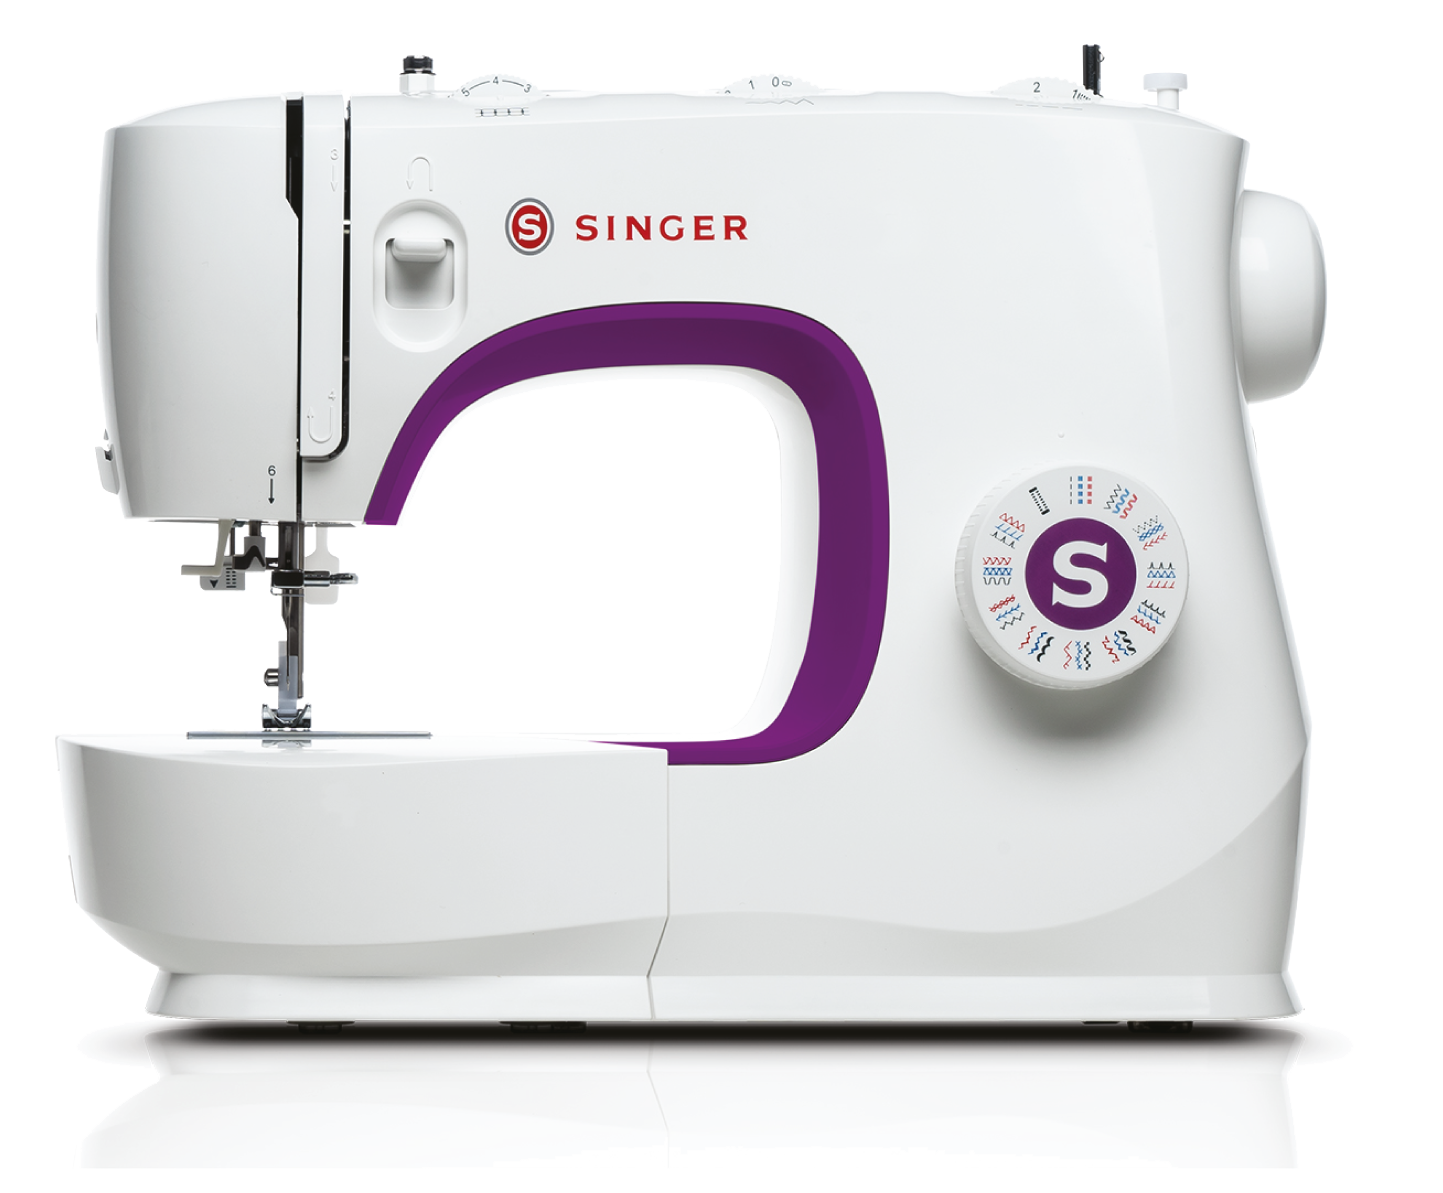 Deluxe Bundle with Singer M35 Luxury Sewing Machine Bag, 24 x thread set, LED lamp, Walking Foot for heavy fabrics * save over £100 *